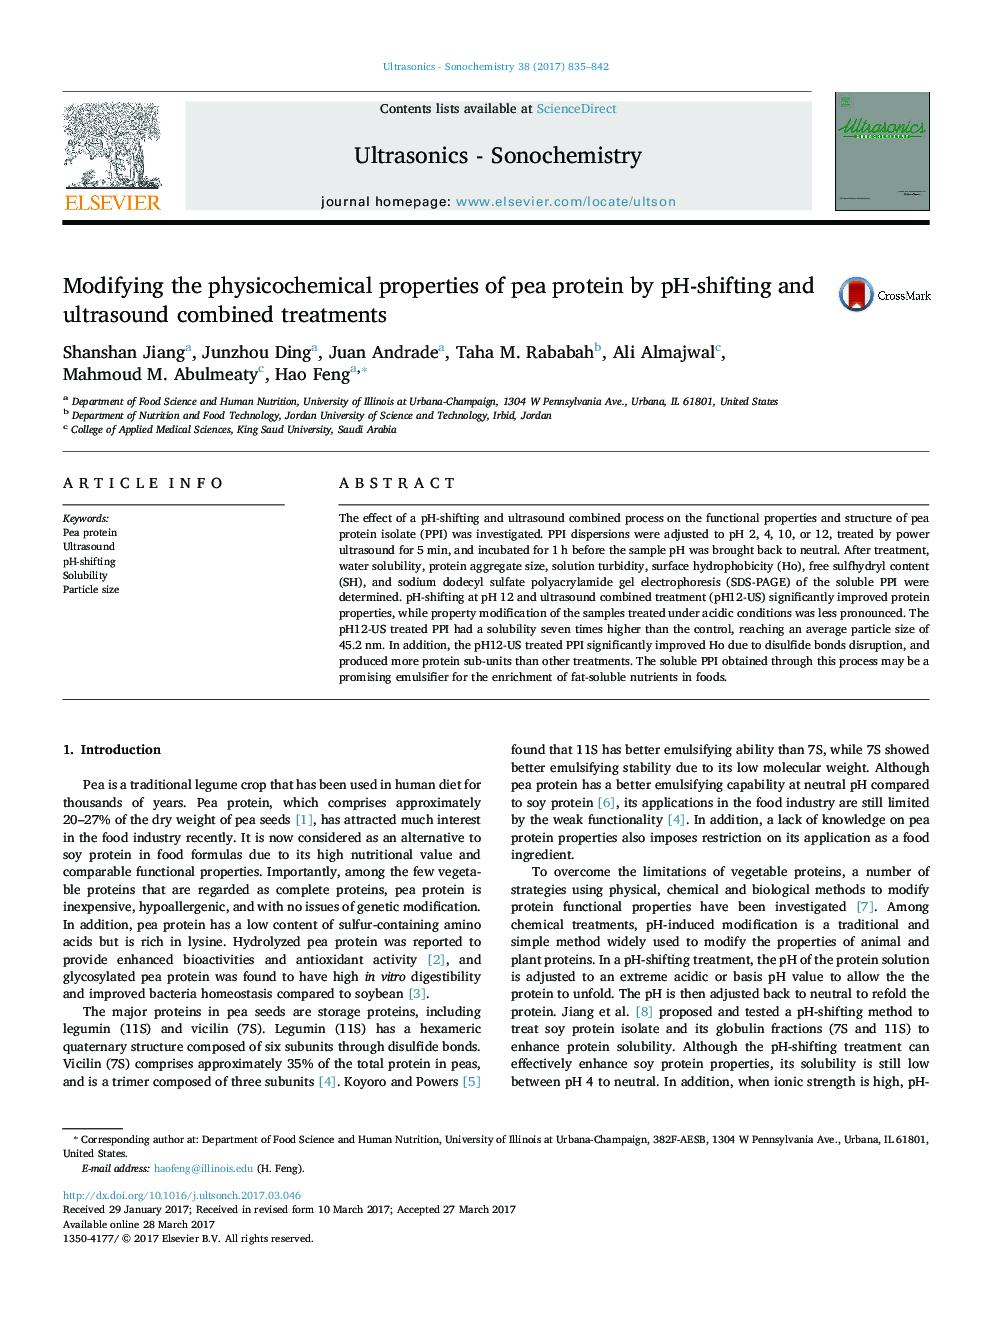 Modifying the physicochemical properties of pea protein by pH-shifting and ultrasound combined treatments